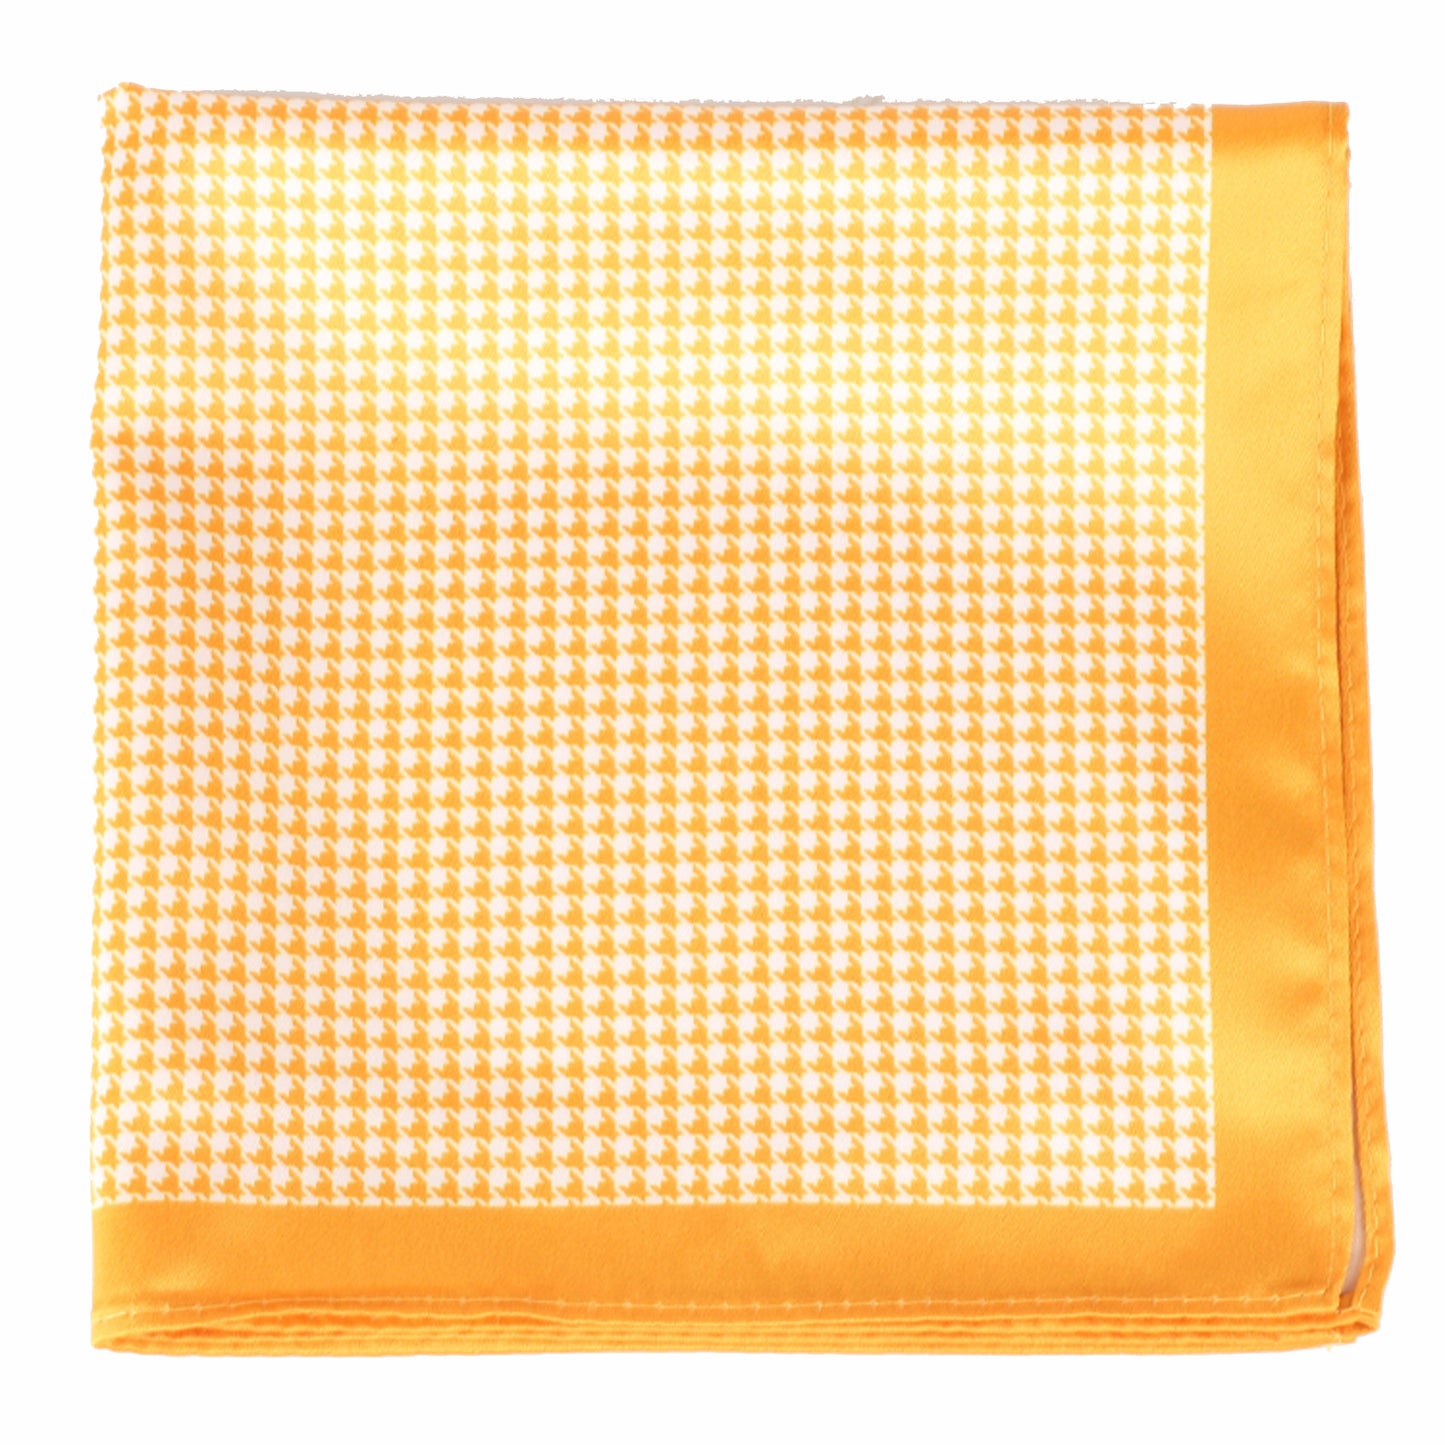 Yellow/White Houndstooth Pocket Square + SquareGuard